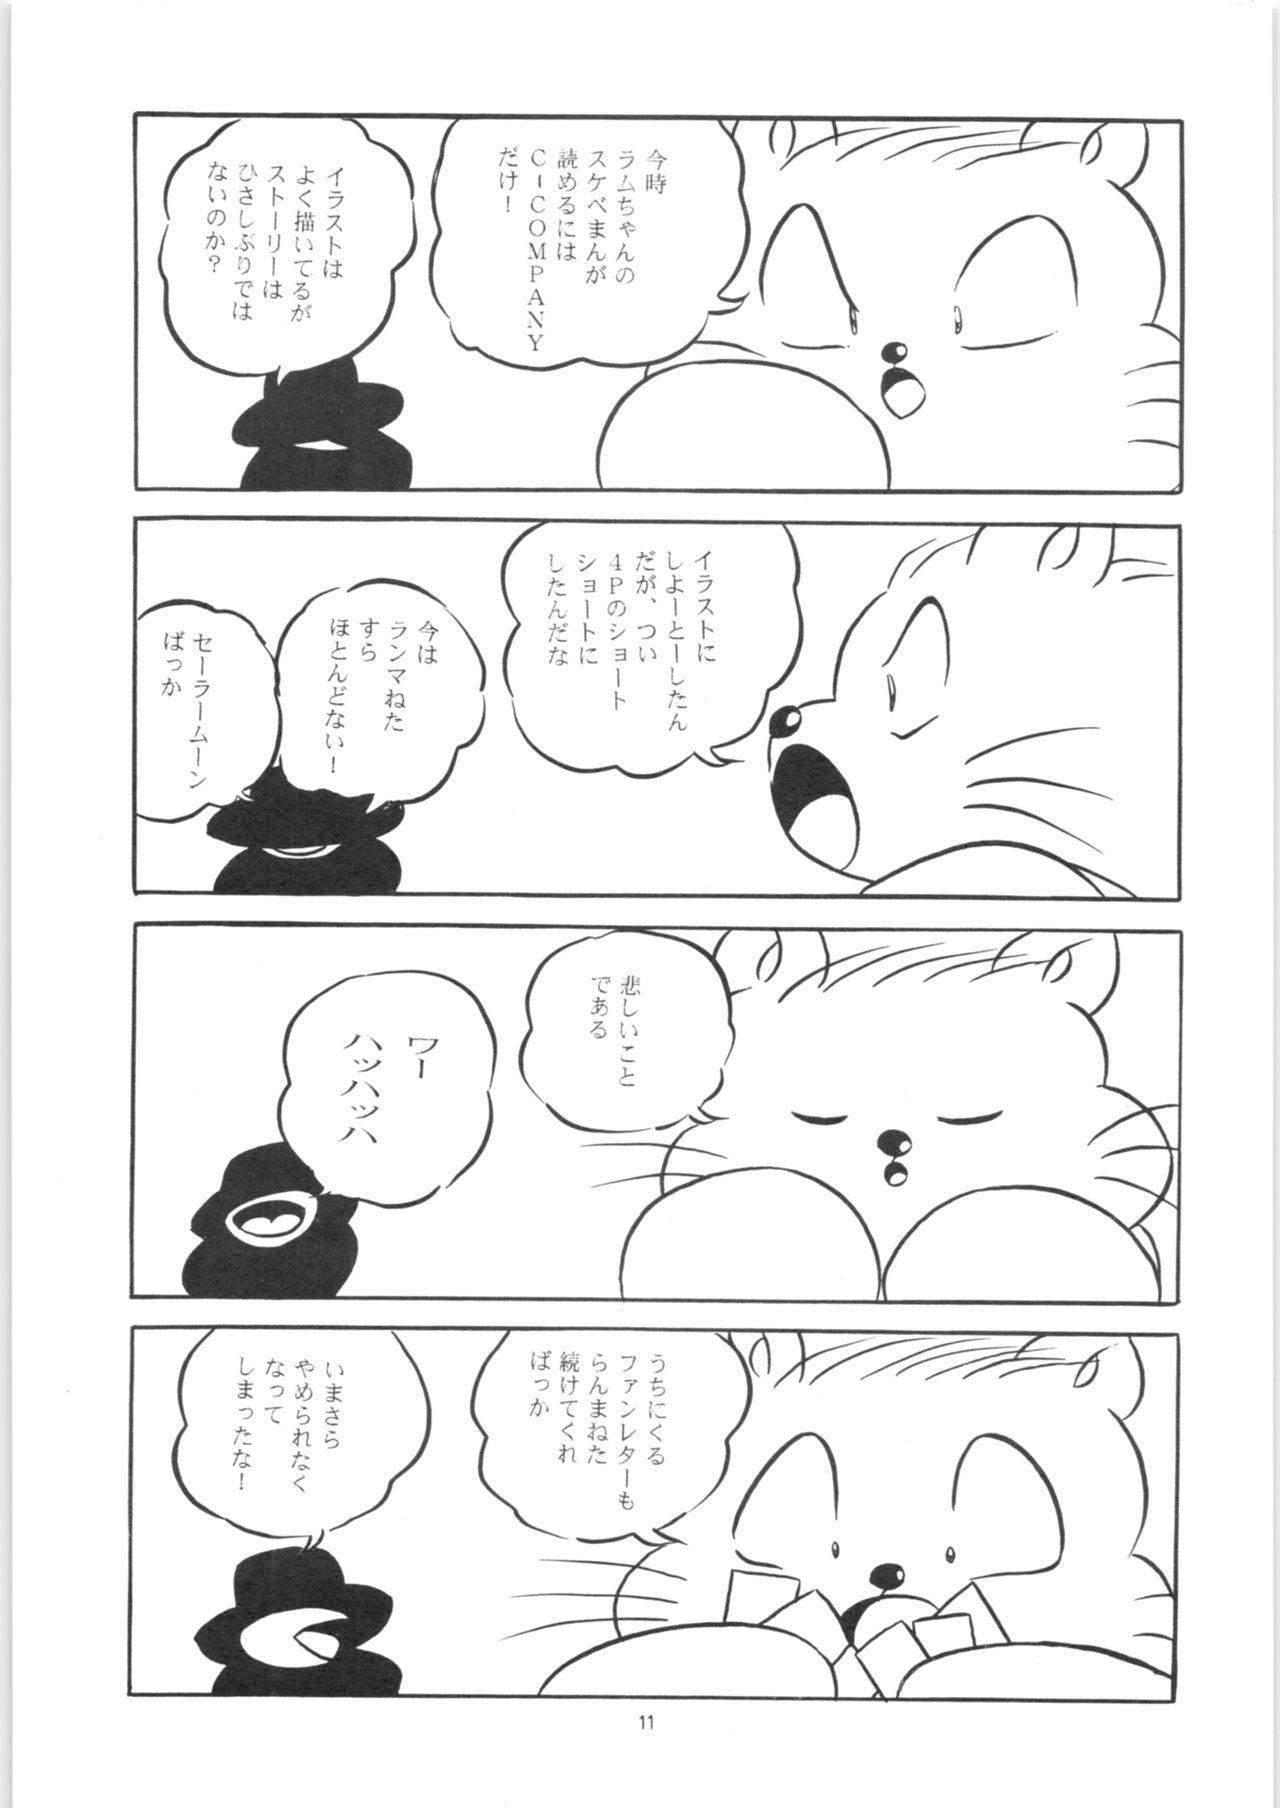 [C-COMPANY] C-COMPANY SPECIAL STAGE 14 (Ranma 1/2) page 12 full